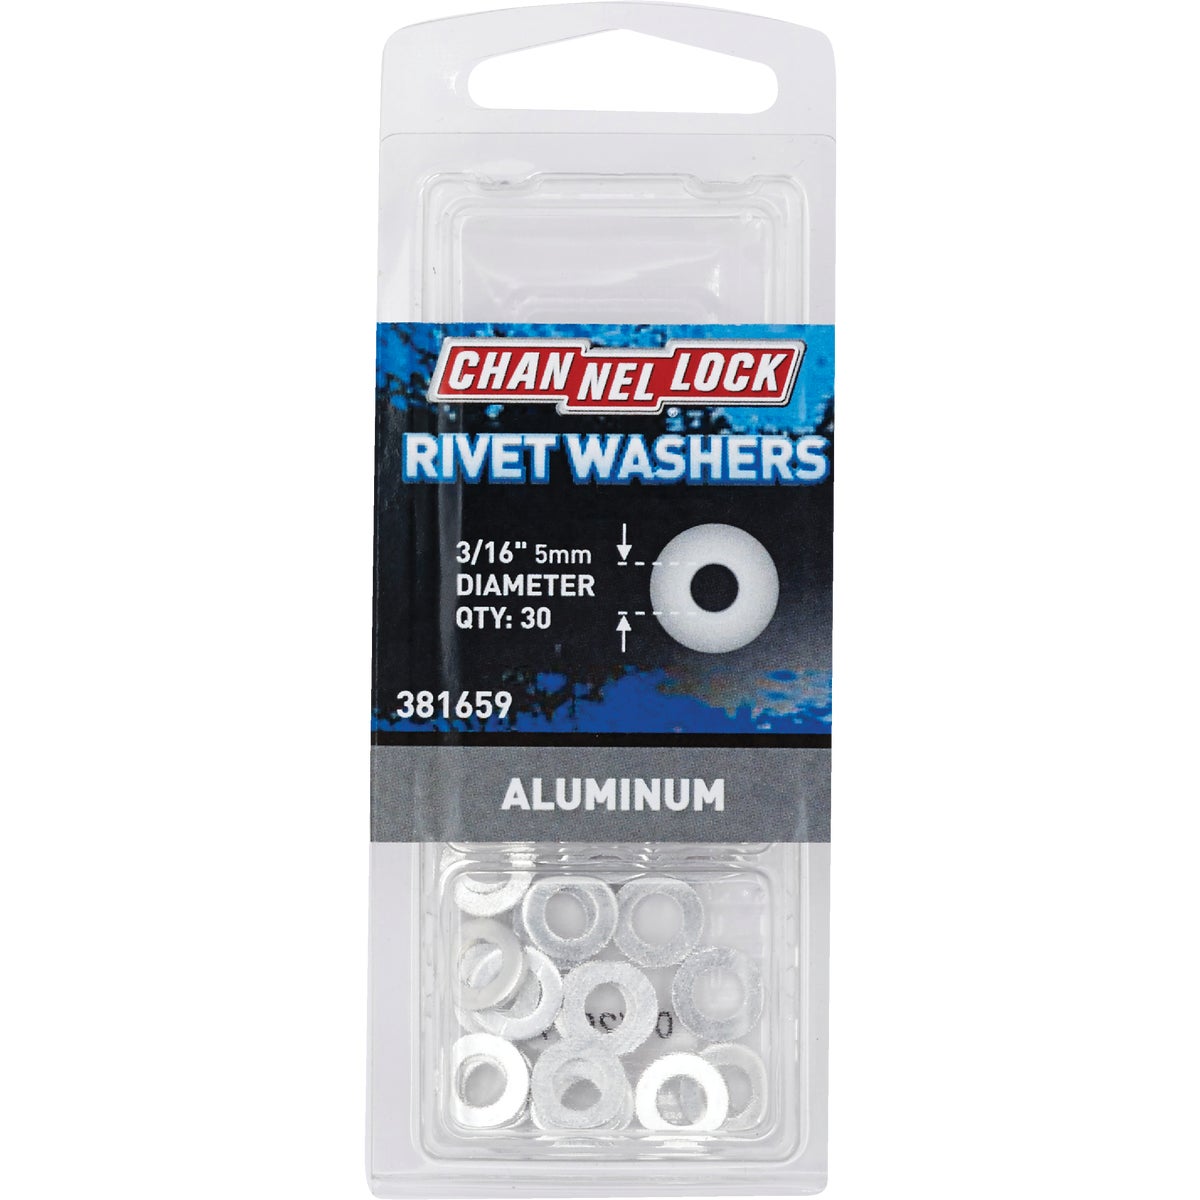 Channellock 3/16 in. Aluminum Rivet Washer (30-Pack)